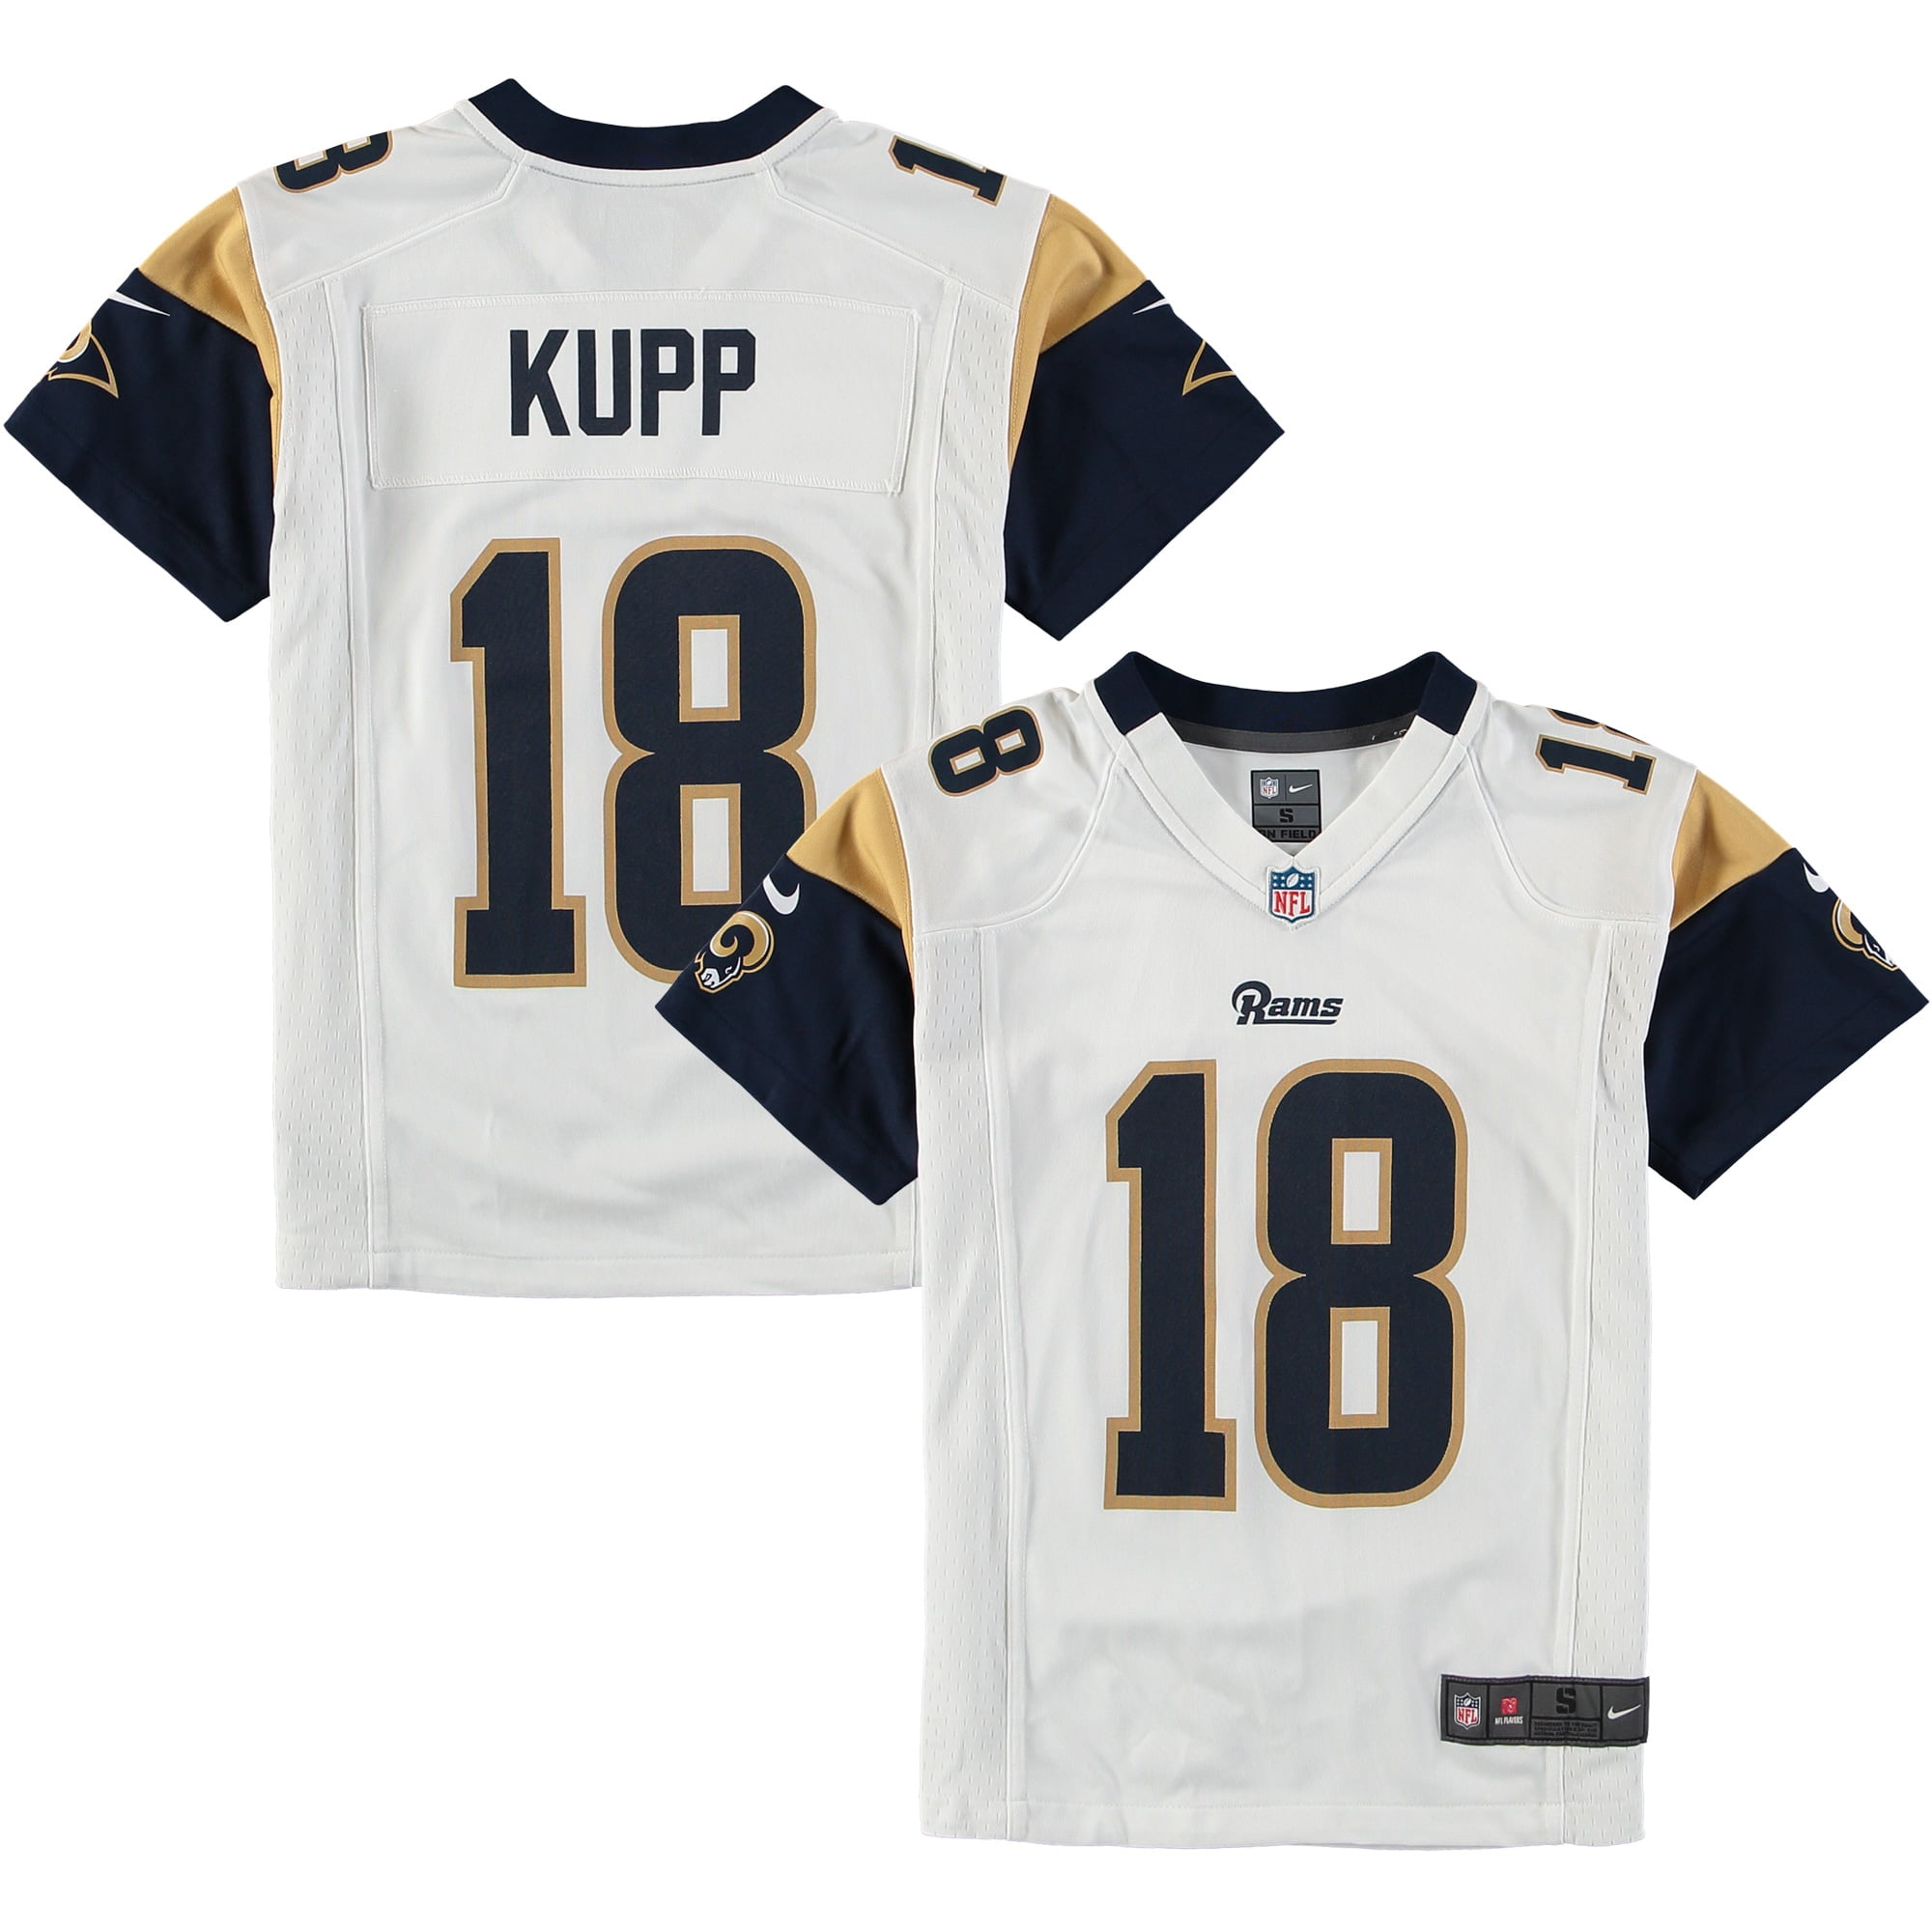 Cooper Kupp Los Angeles Rams Nike Youth Road Game Jersey - White - Walmart.com ...